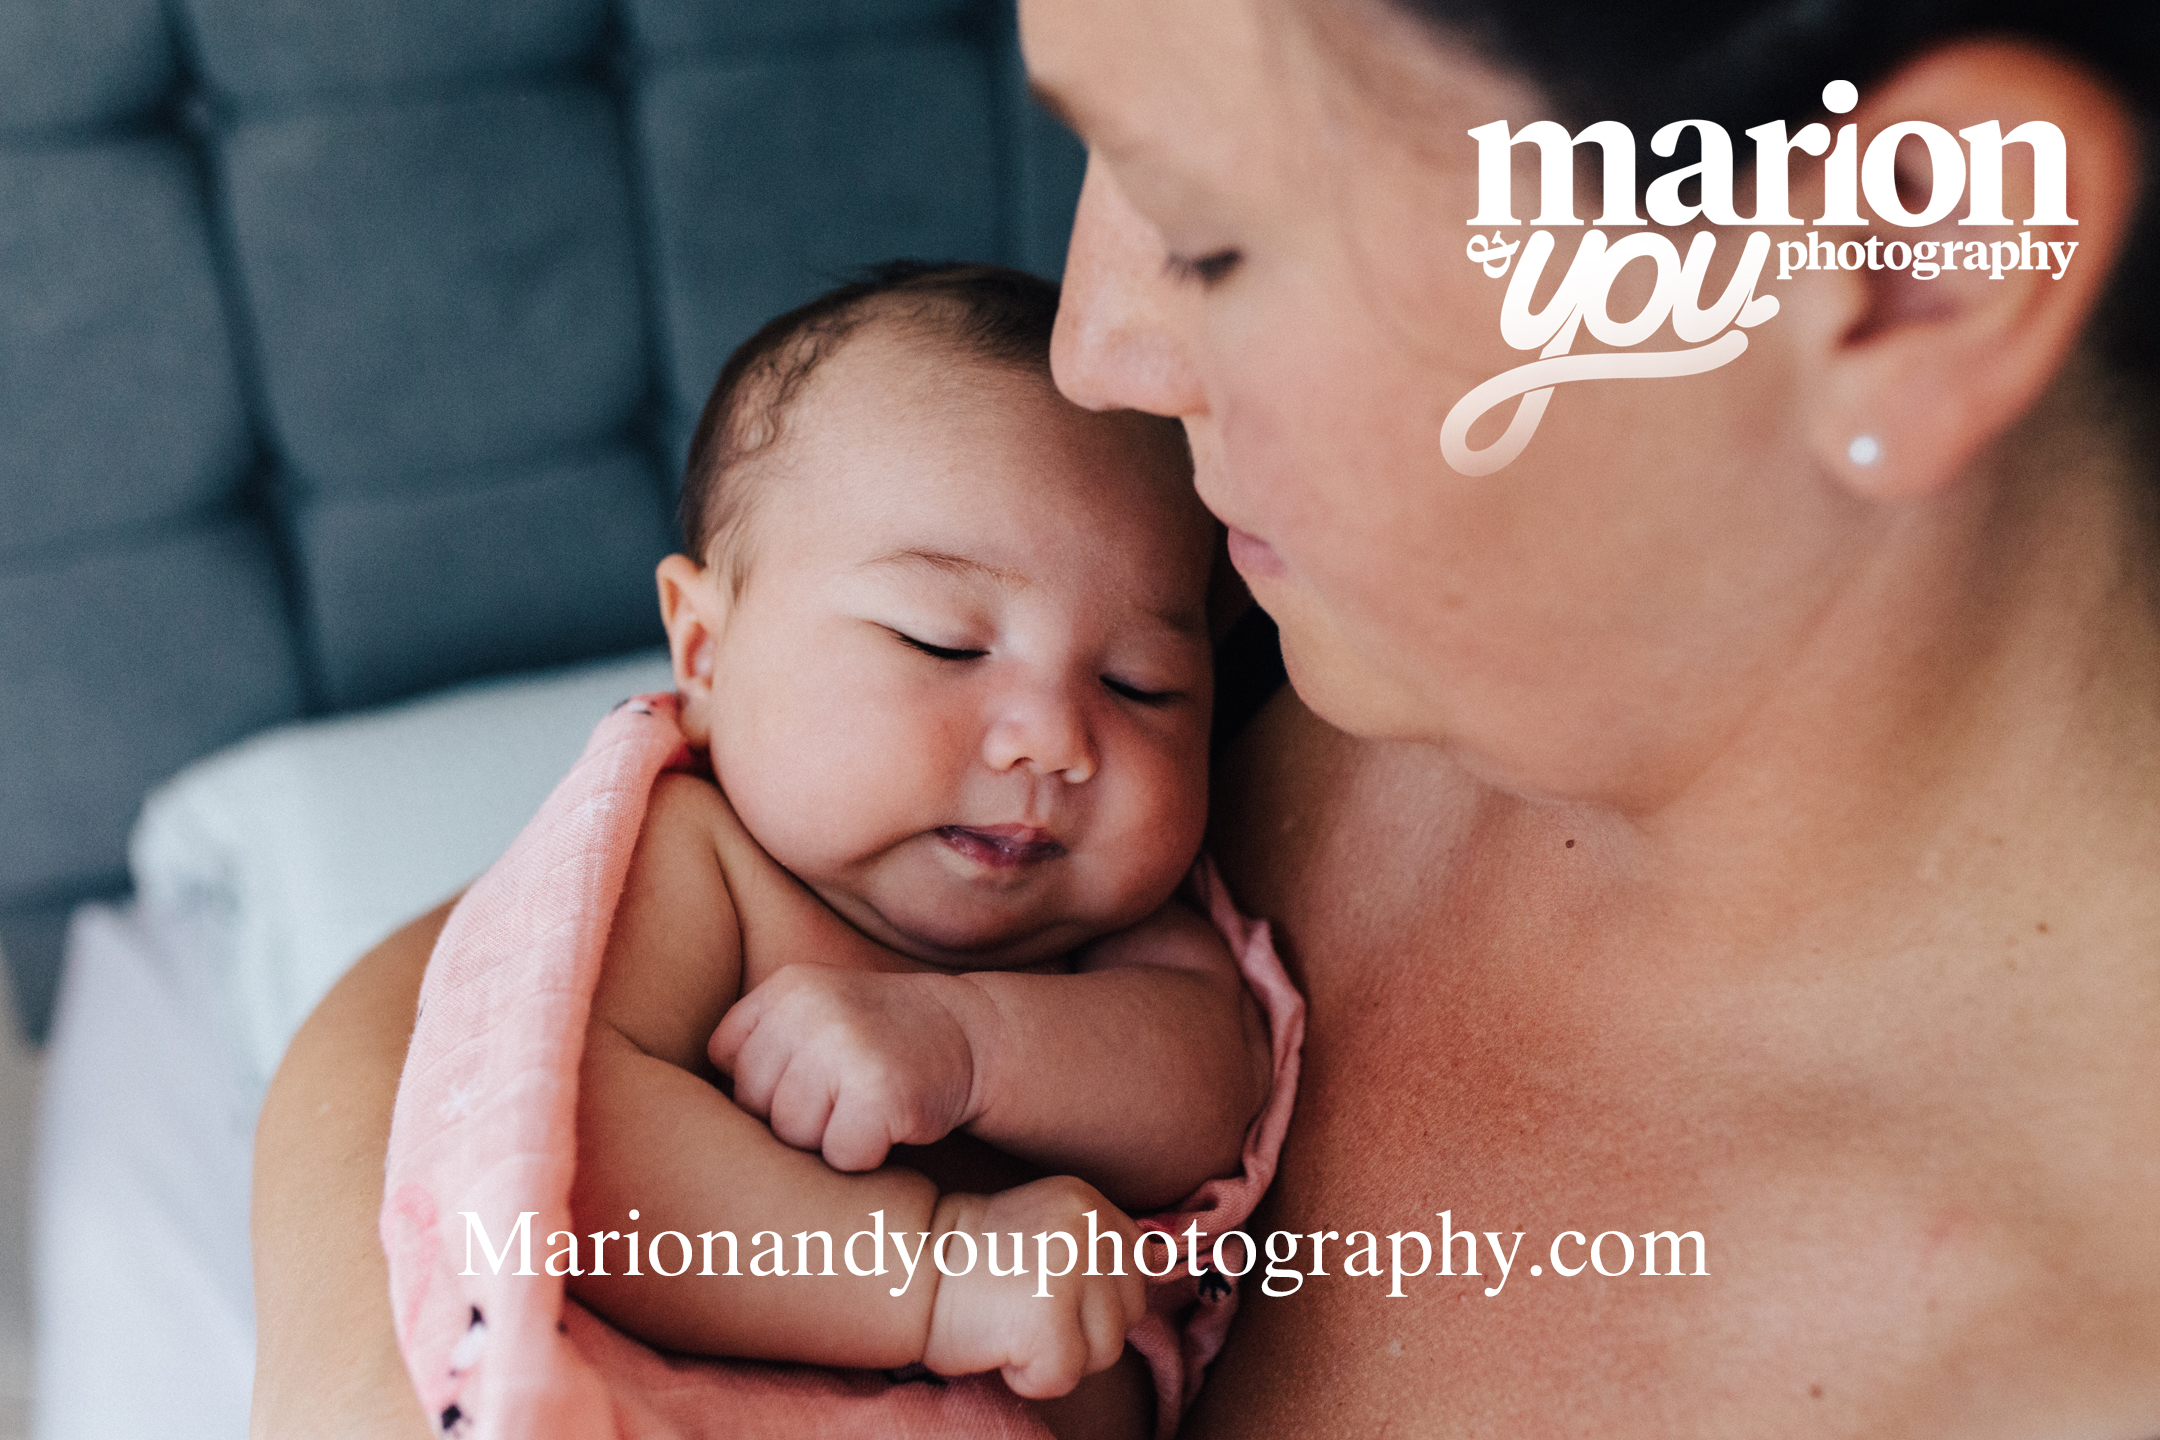 Get Natural Unposed Newborn Photos In Streatham From This Baby Photographer